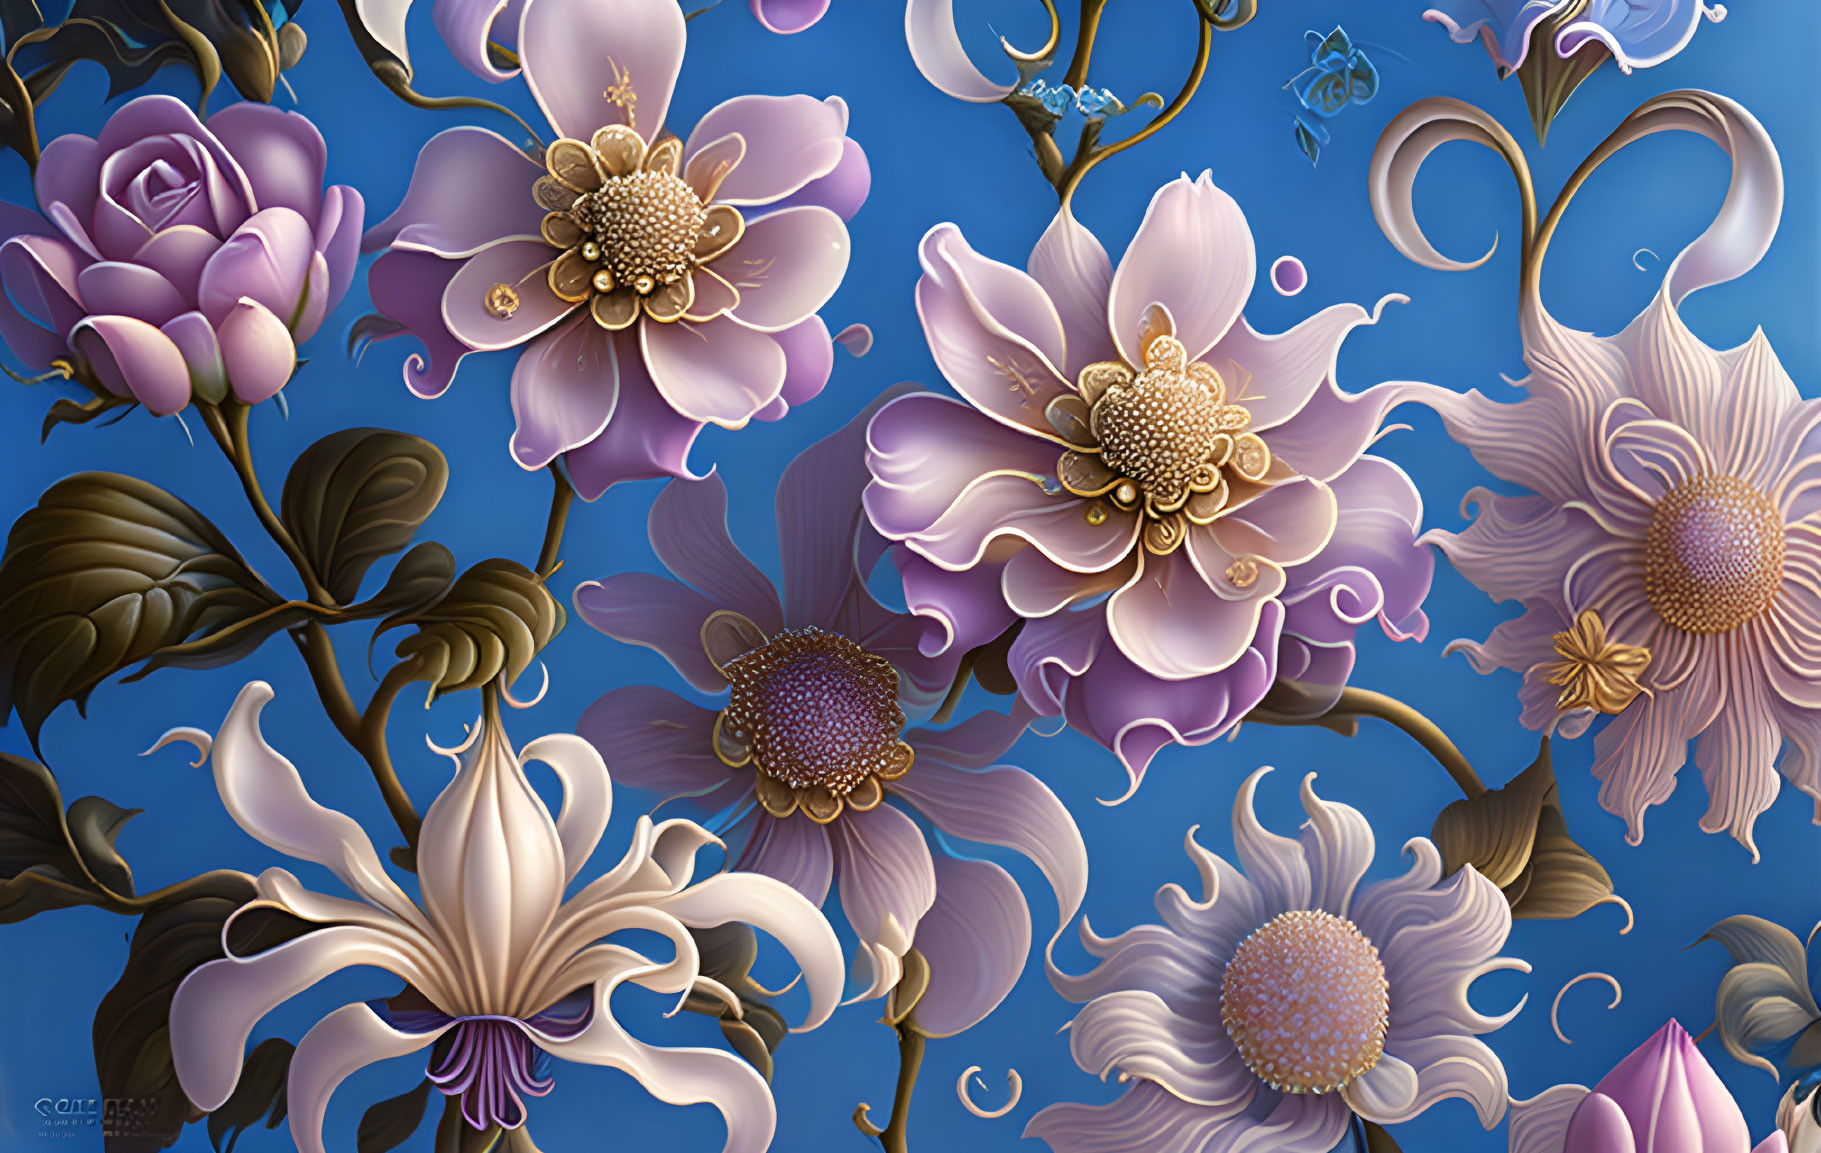 Colorful digital artwork: Purple and pink ornate flowers with gold details on blue background